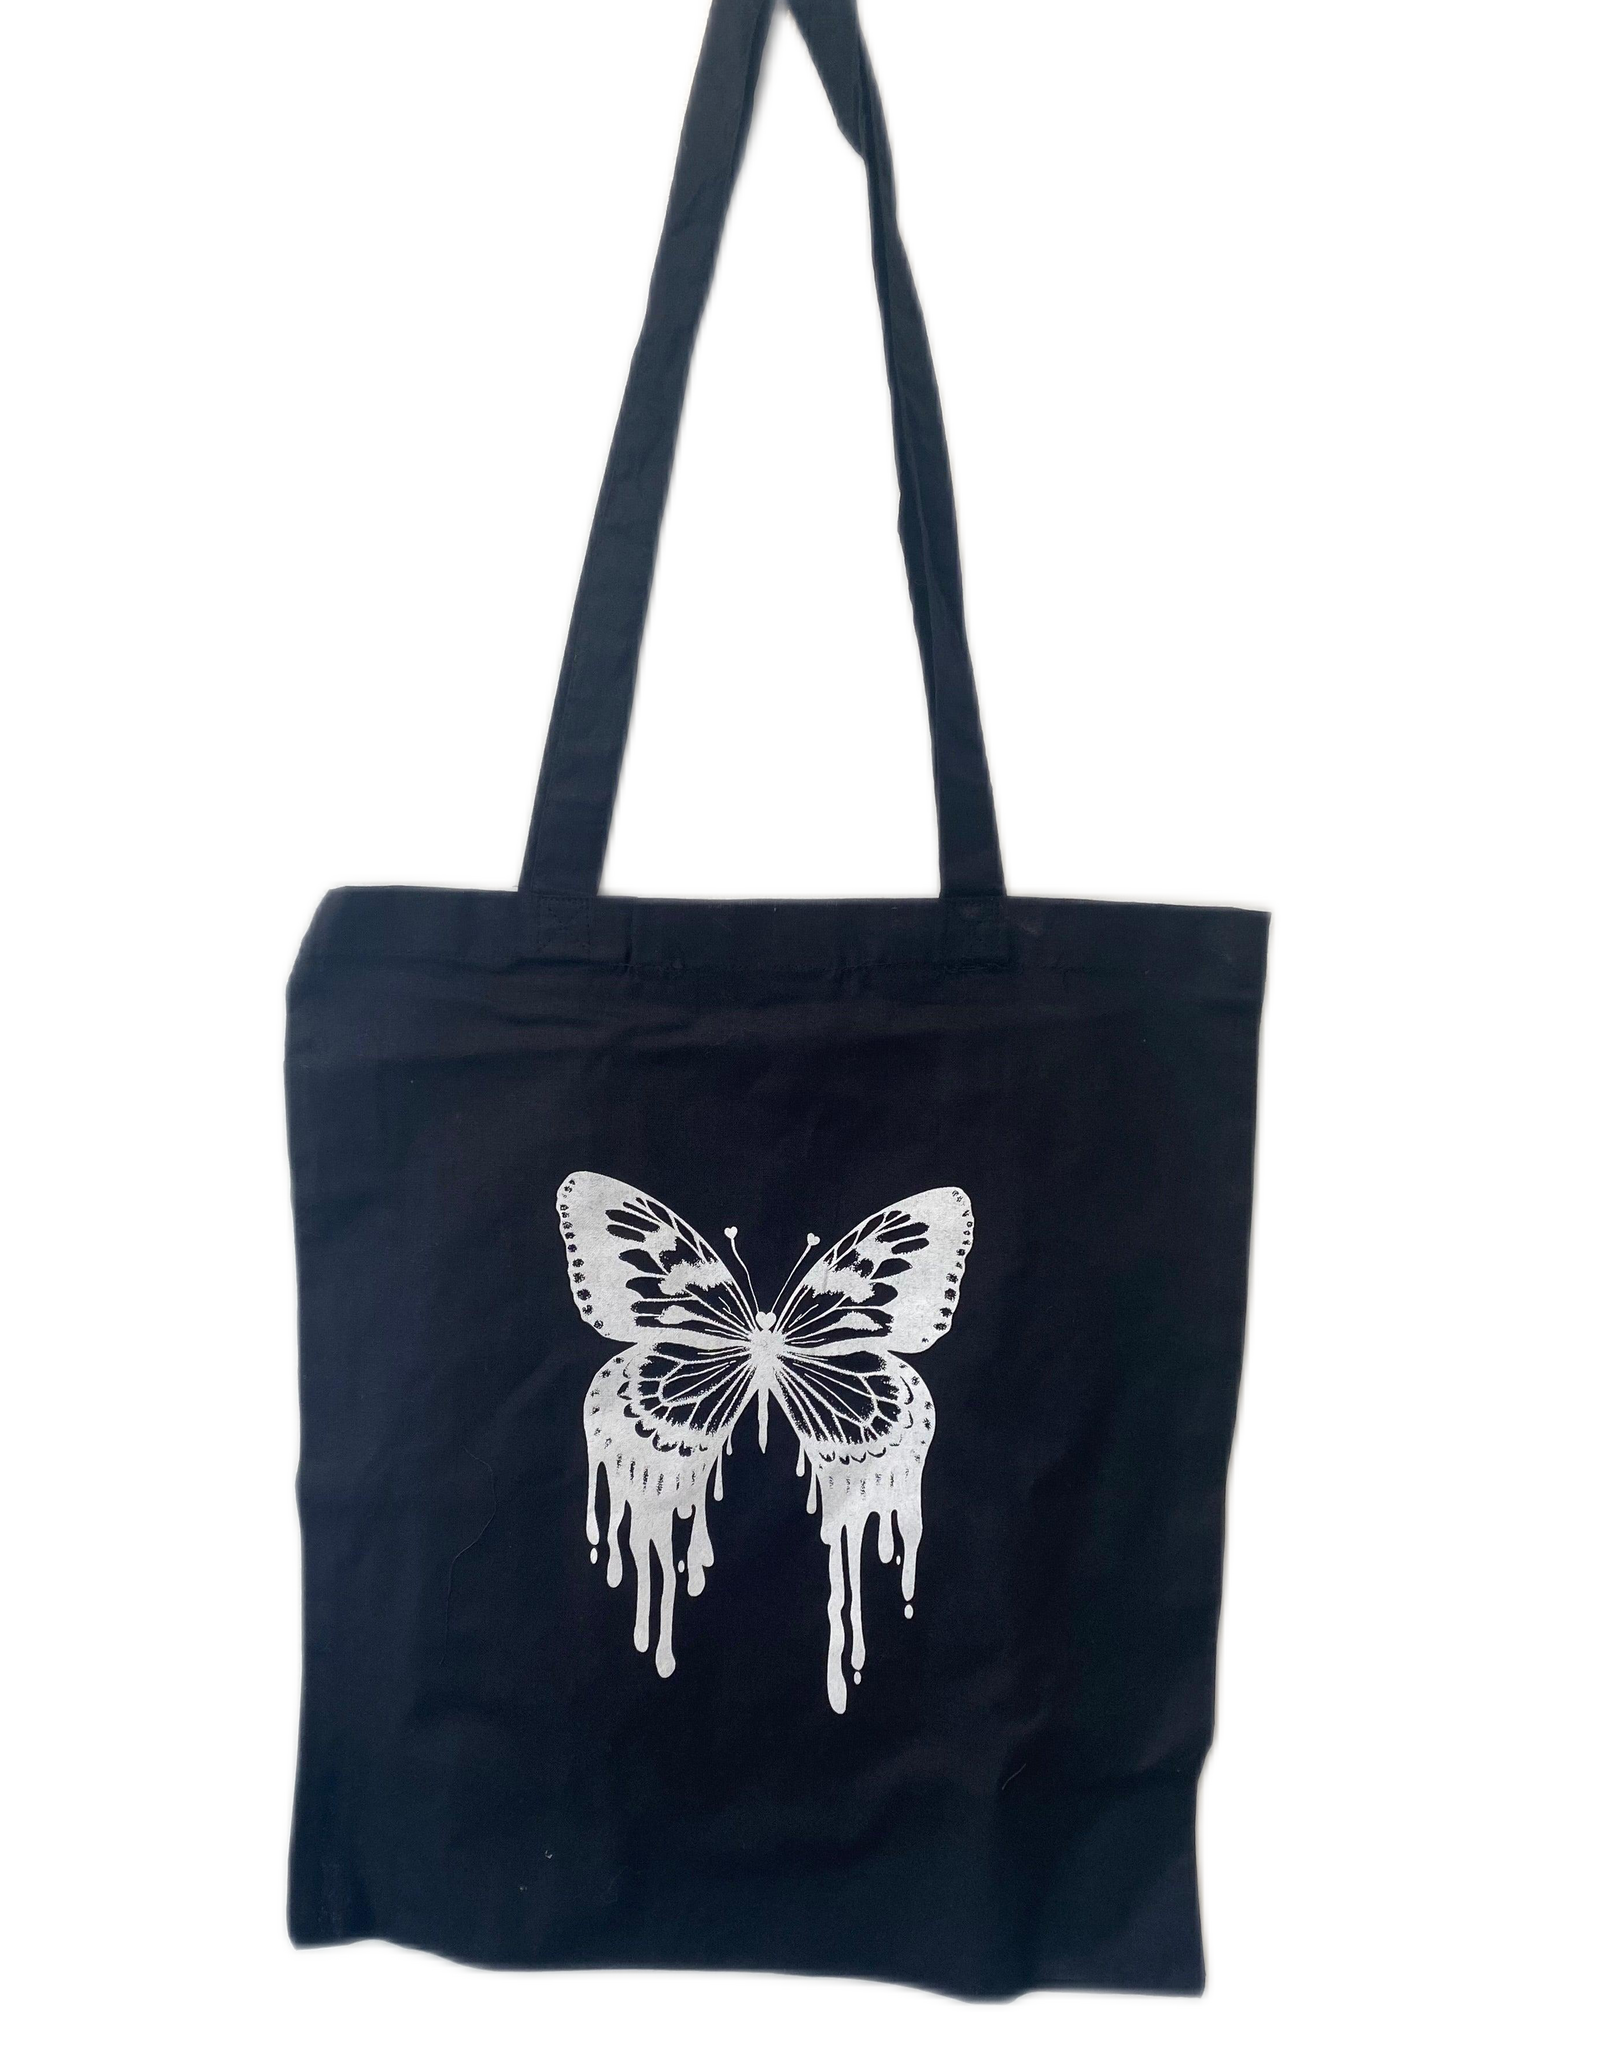 'The Butterfly Effect' Tote Bag